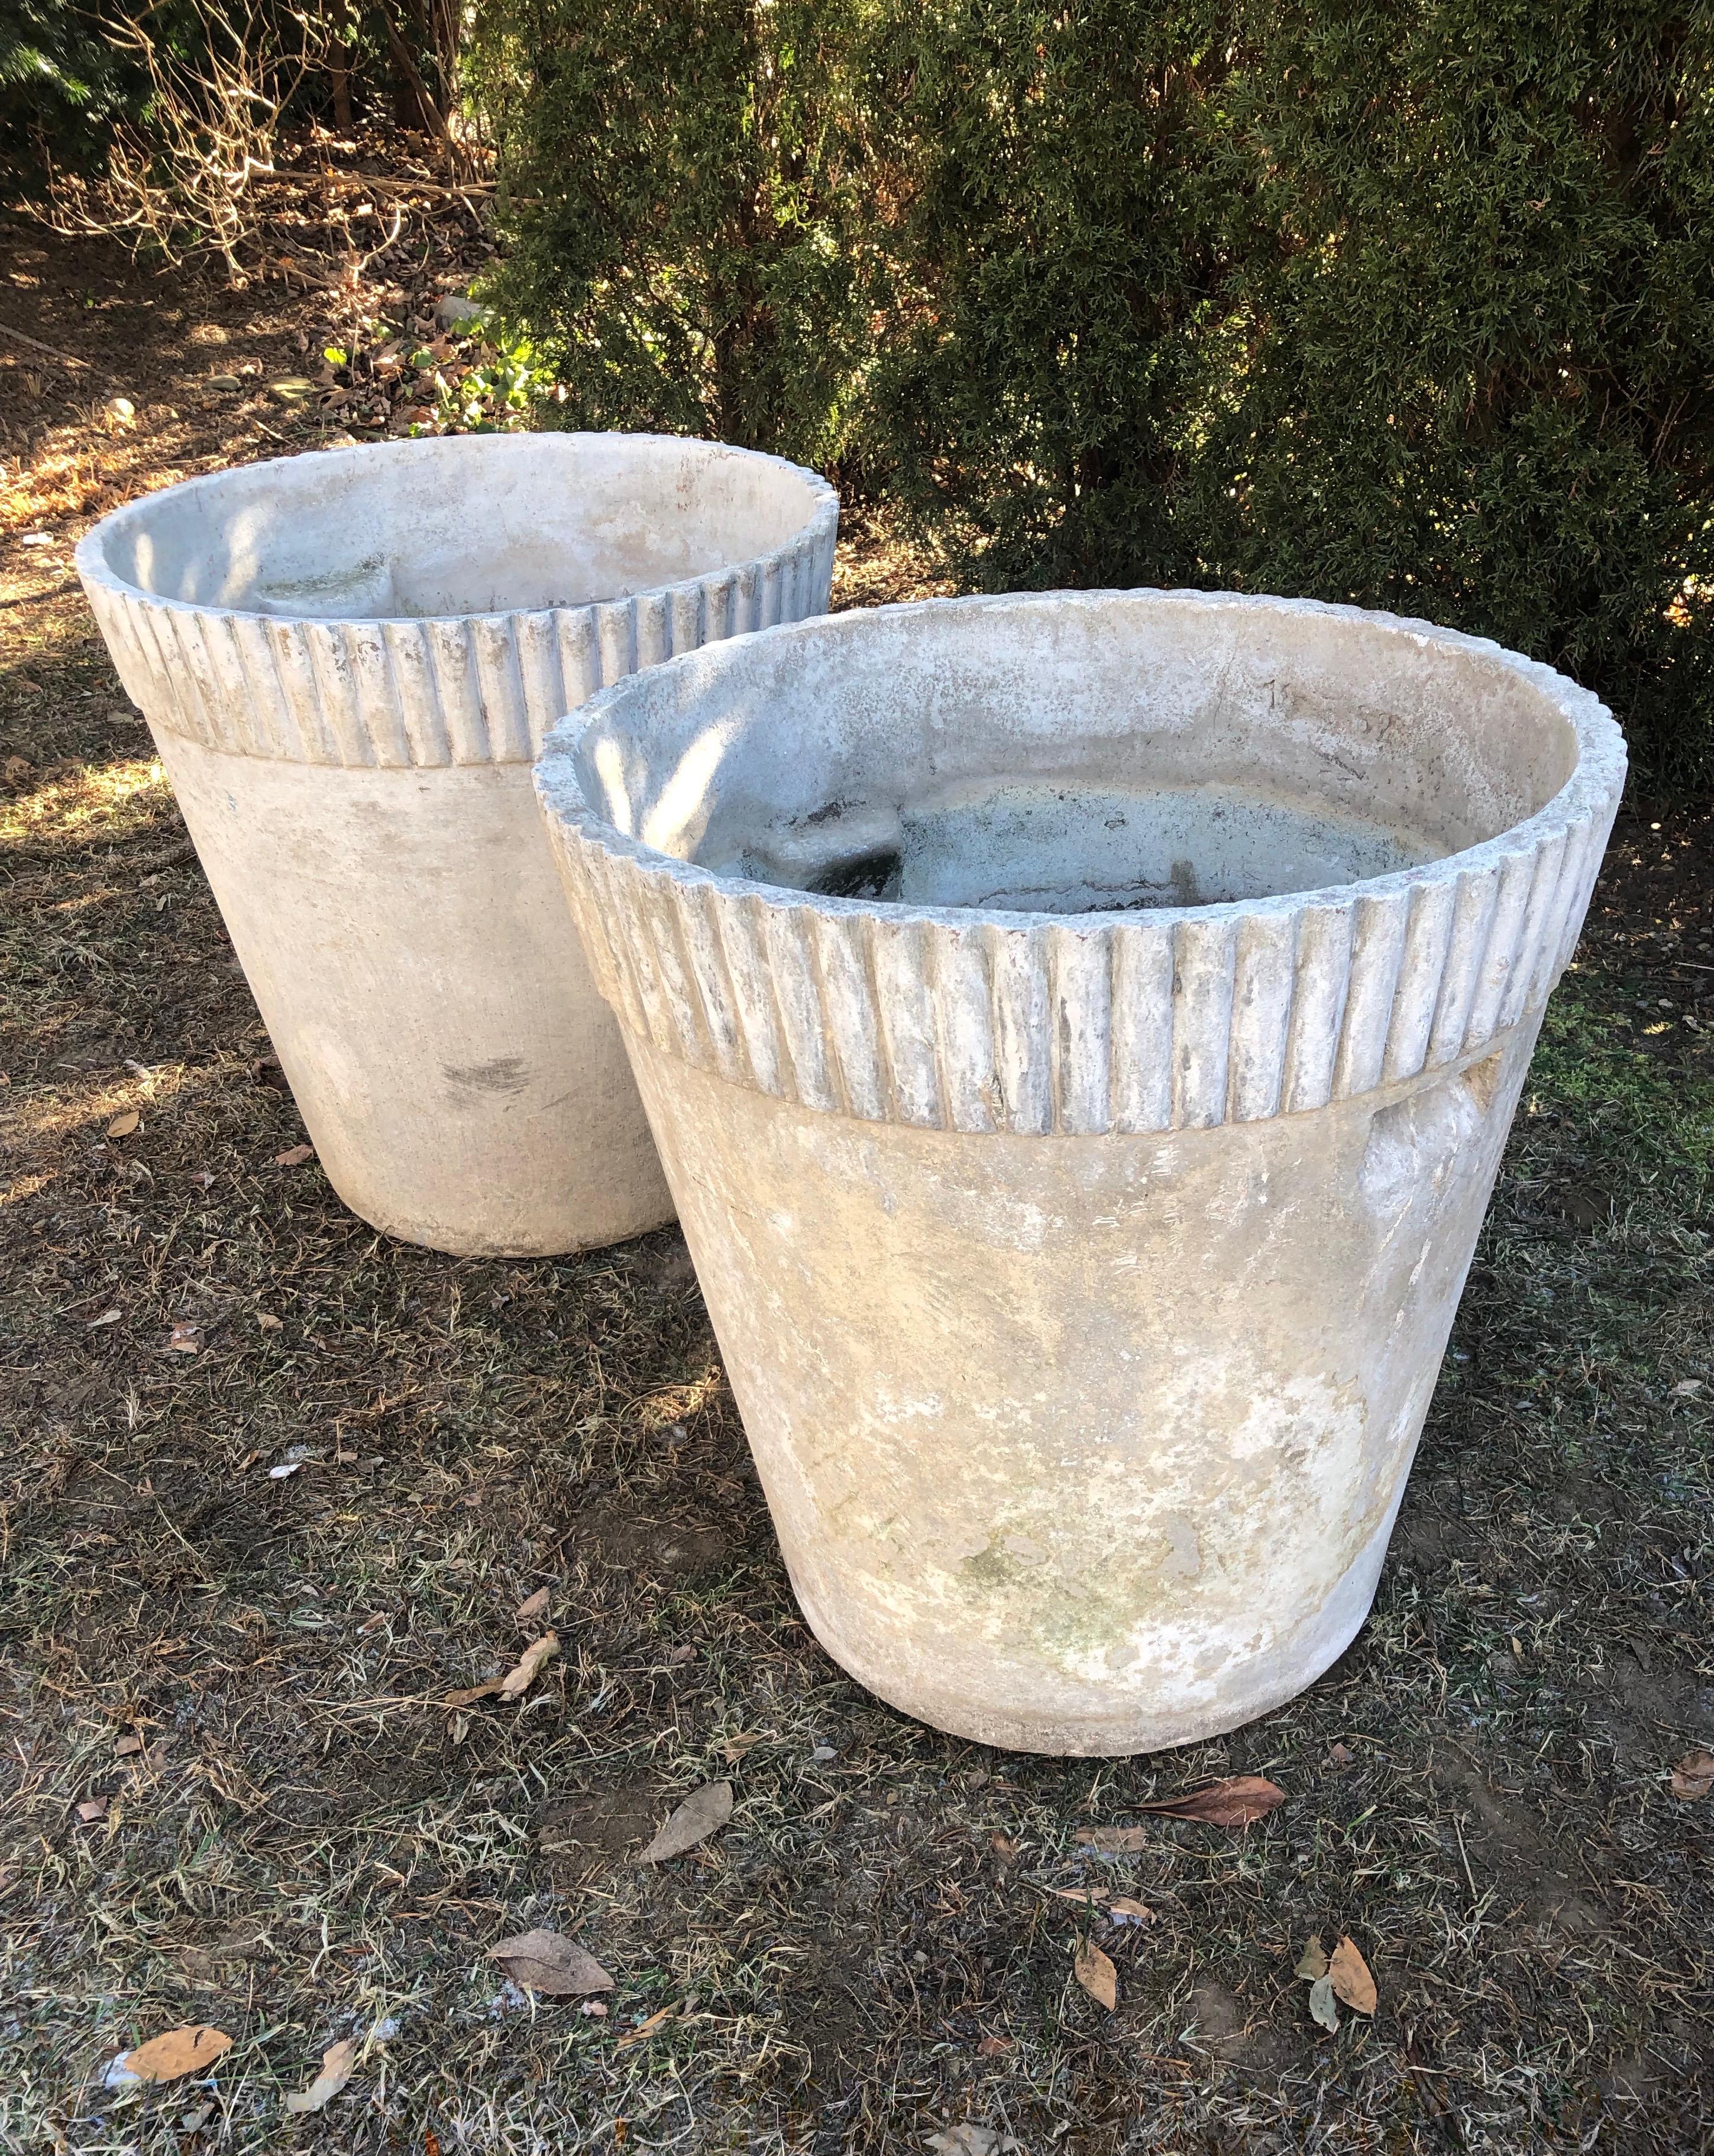 It is rare to find a pair of this form of flower pot planter, designed by Willy Guhl, and produced by Eternit, particularly when one is dated May 3, 1960. In superb structural condition, they feature two inset handles on opposing sides and a lovely